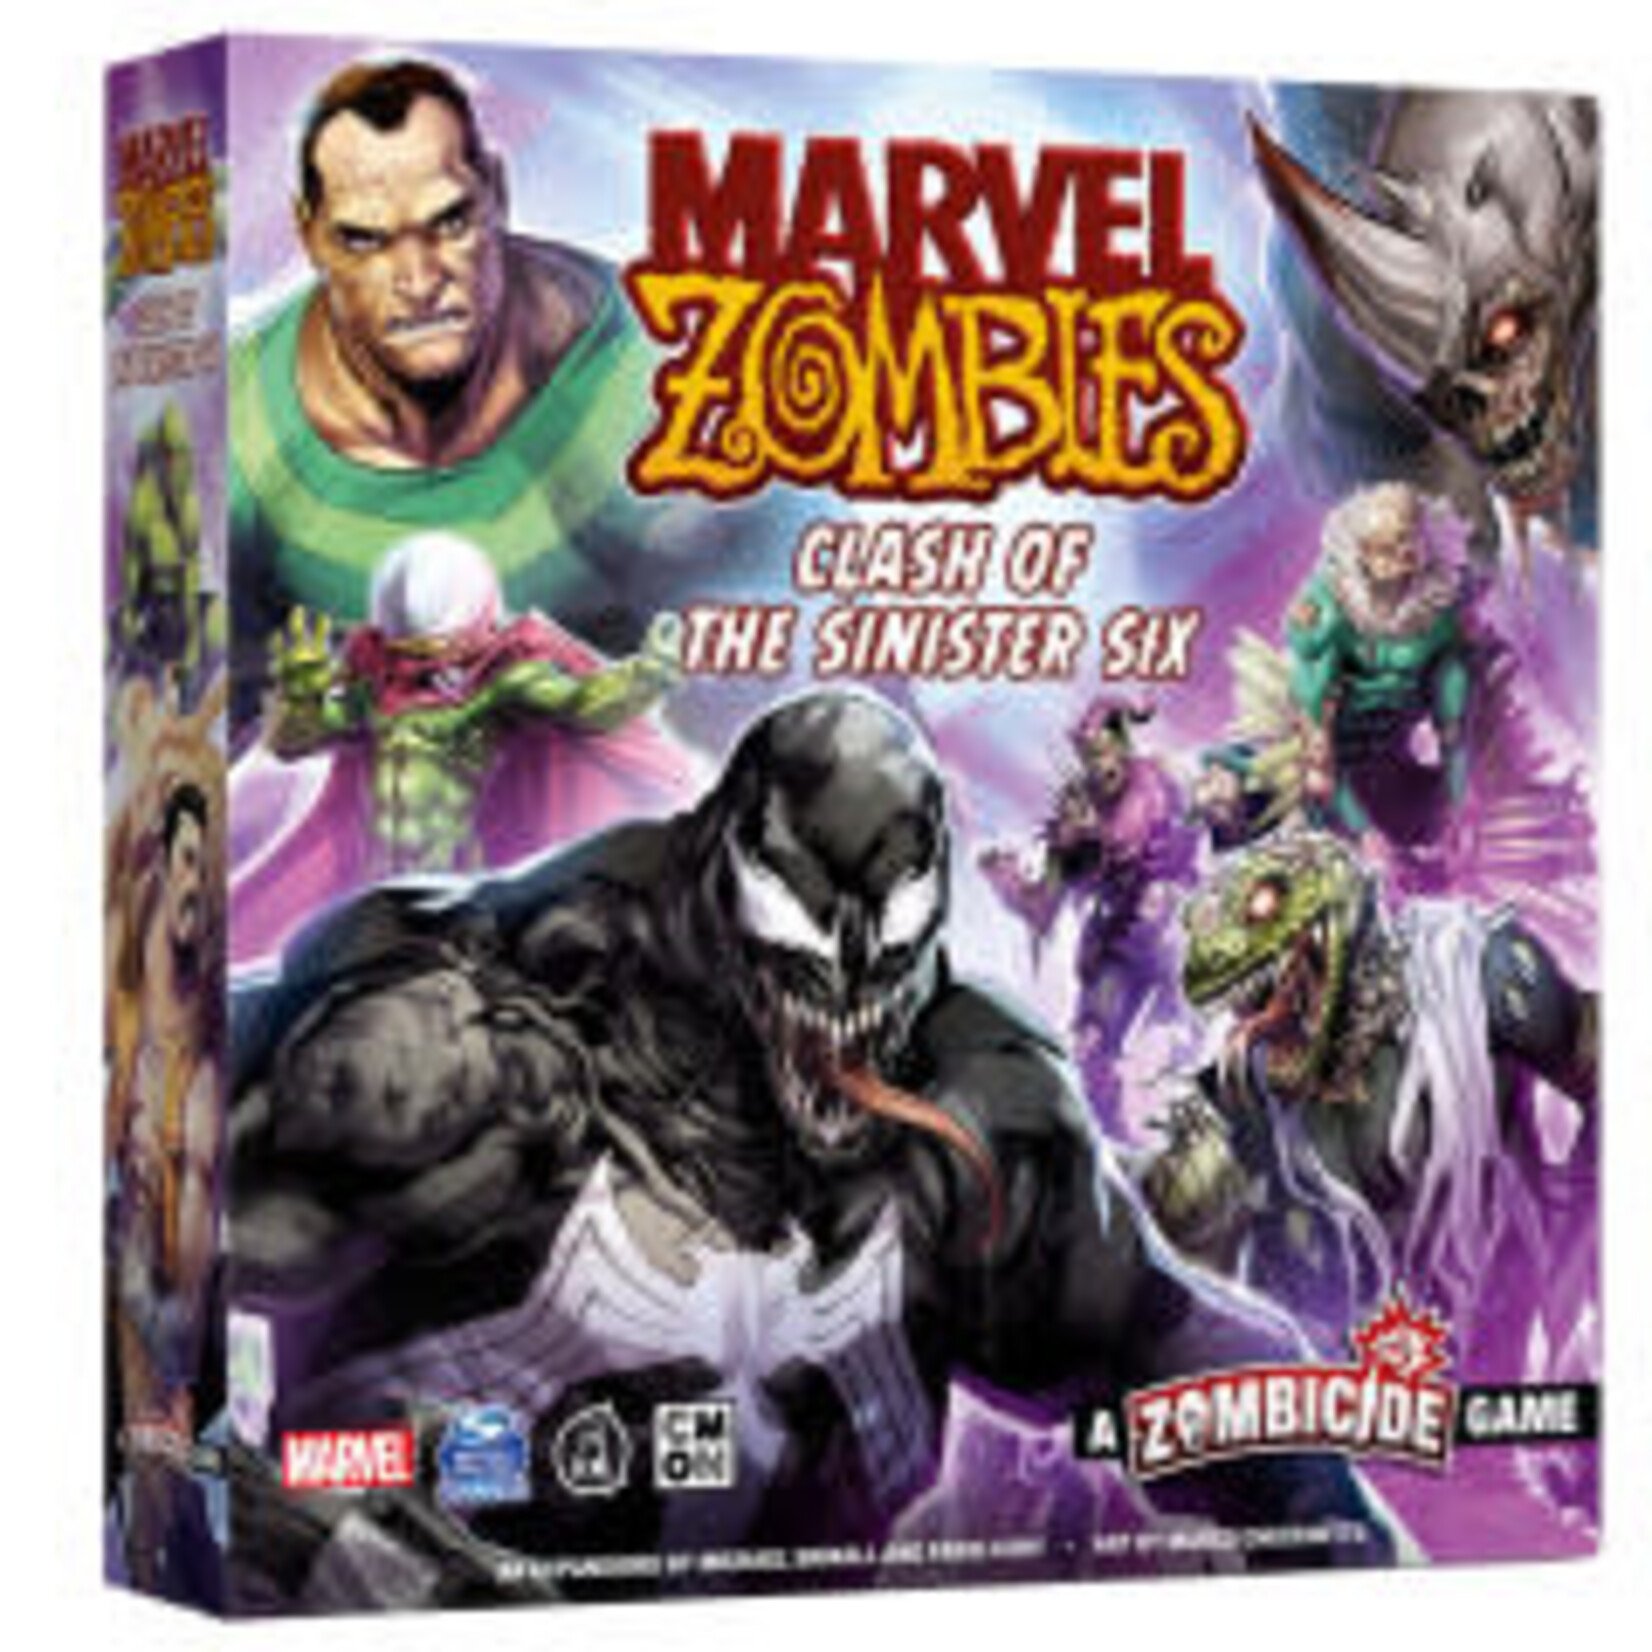 Cool Mini or Not Marvel Zombies: Hungry Pledge